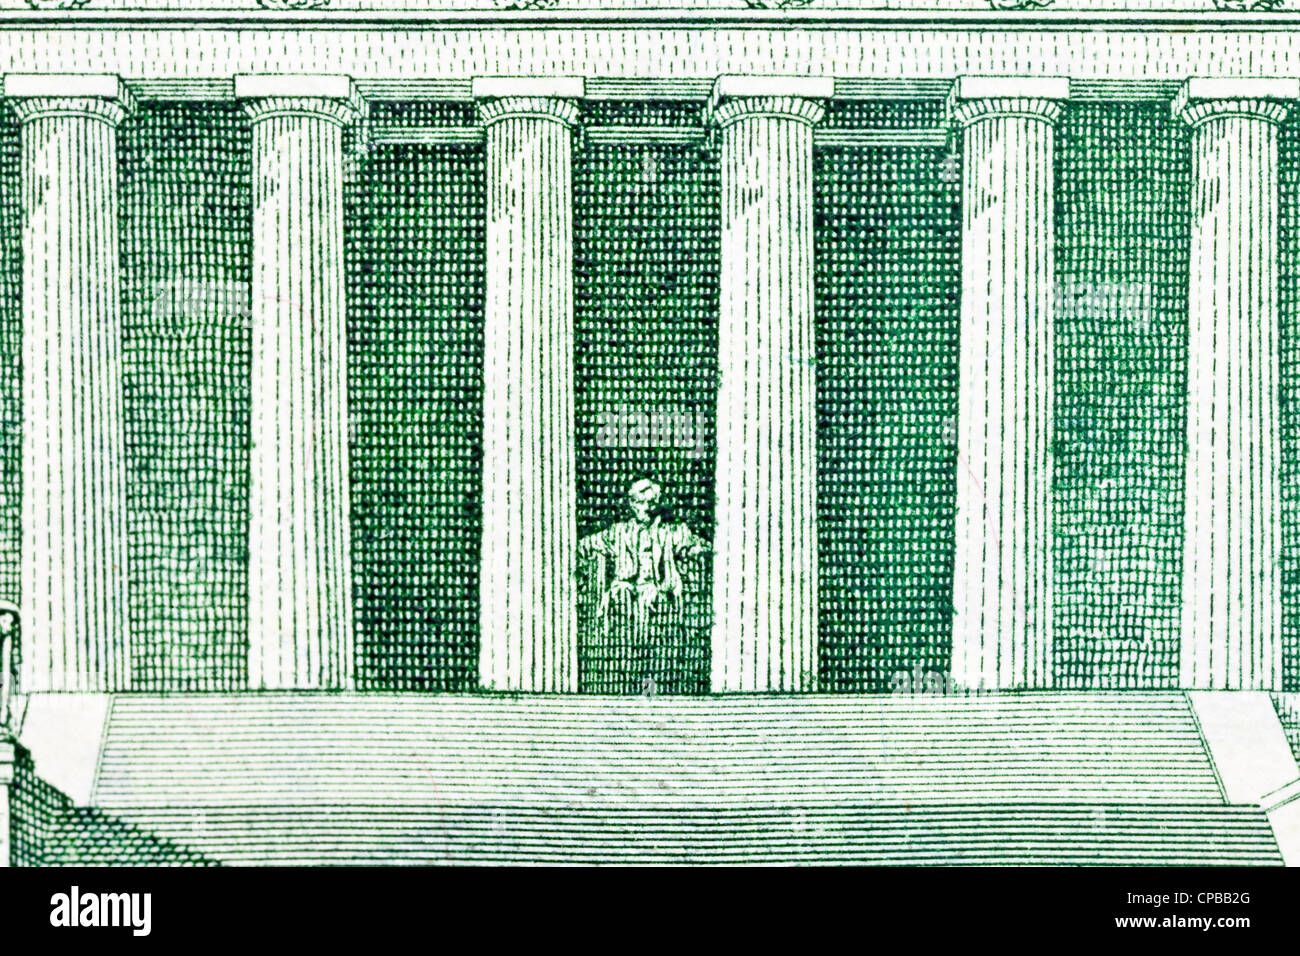 Lincoln Memorial depiction of the US Five Dollar Bill. Stock Photo